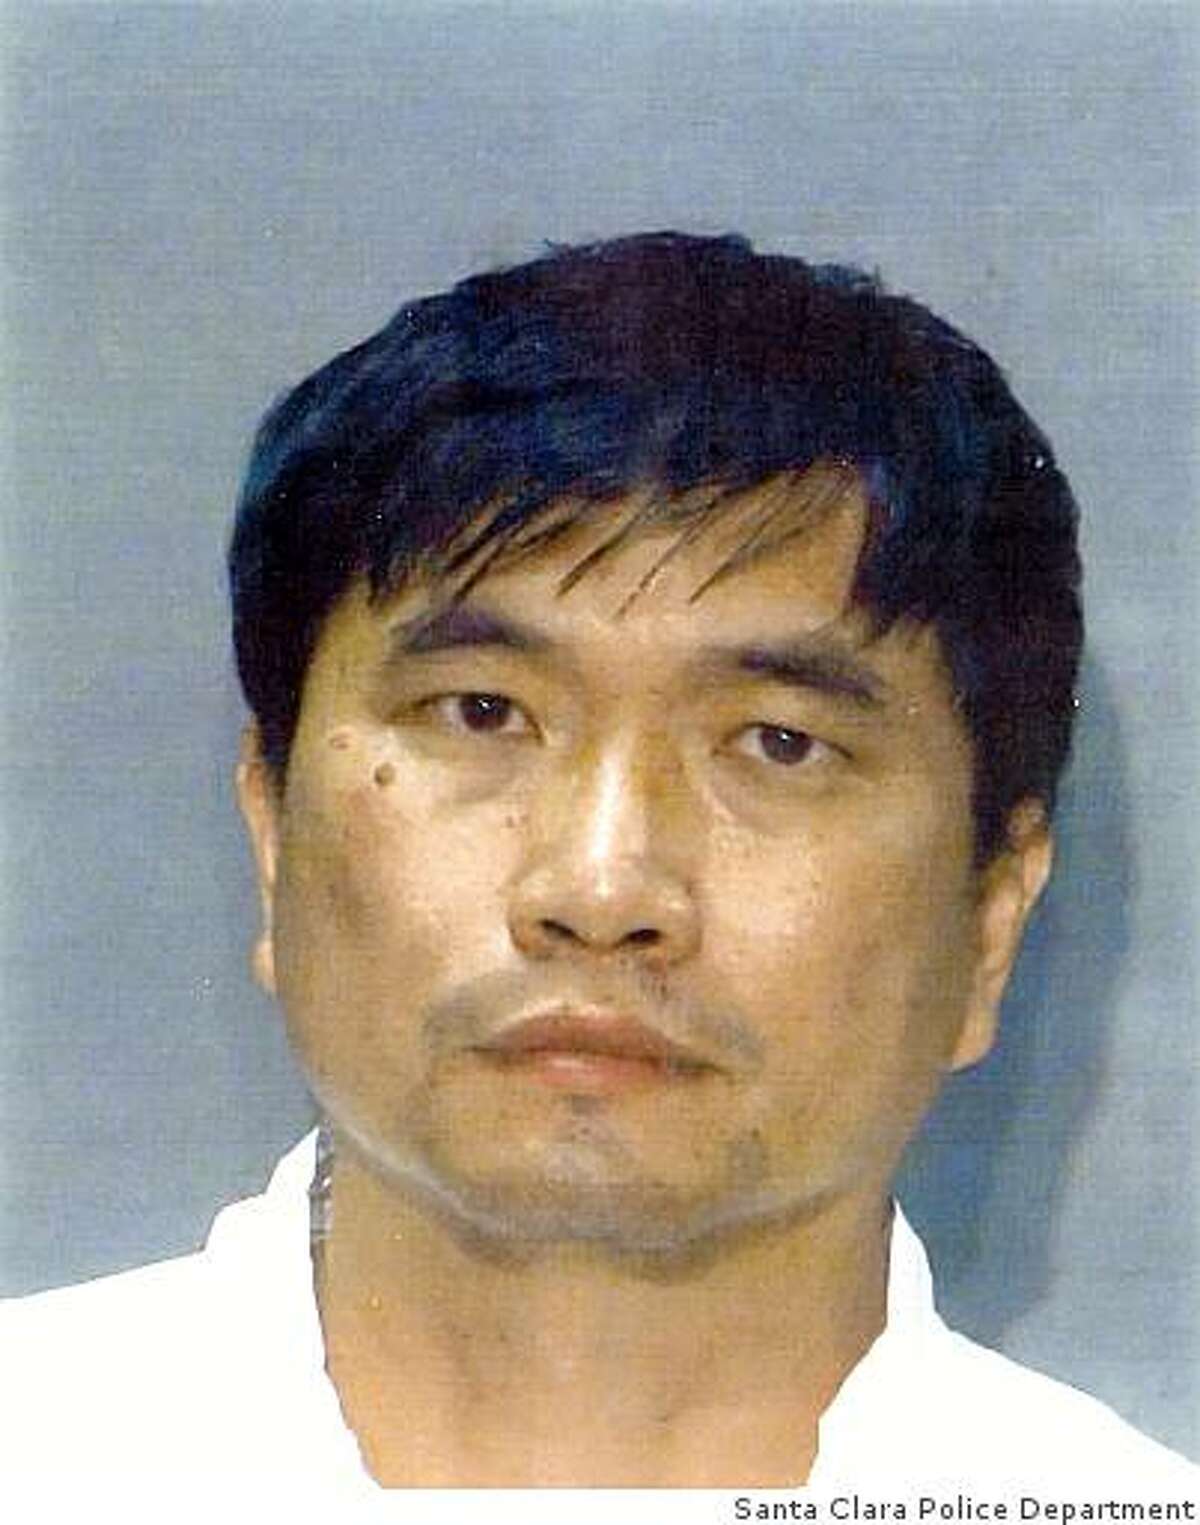 Jing Wu, 47, of Mountain View, was arrested in connection with a triple homicide in Santa Clara on November 15, 2008.